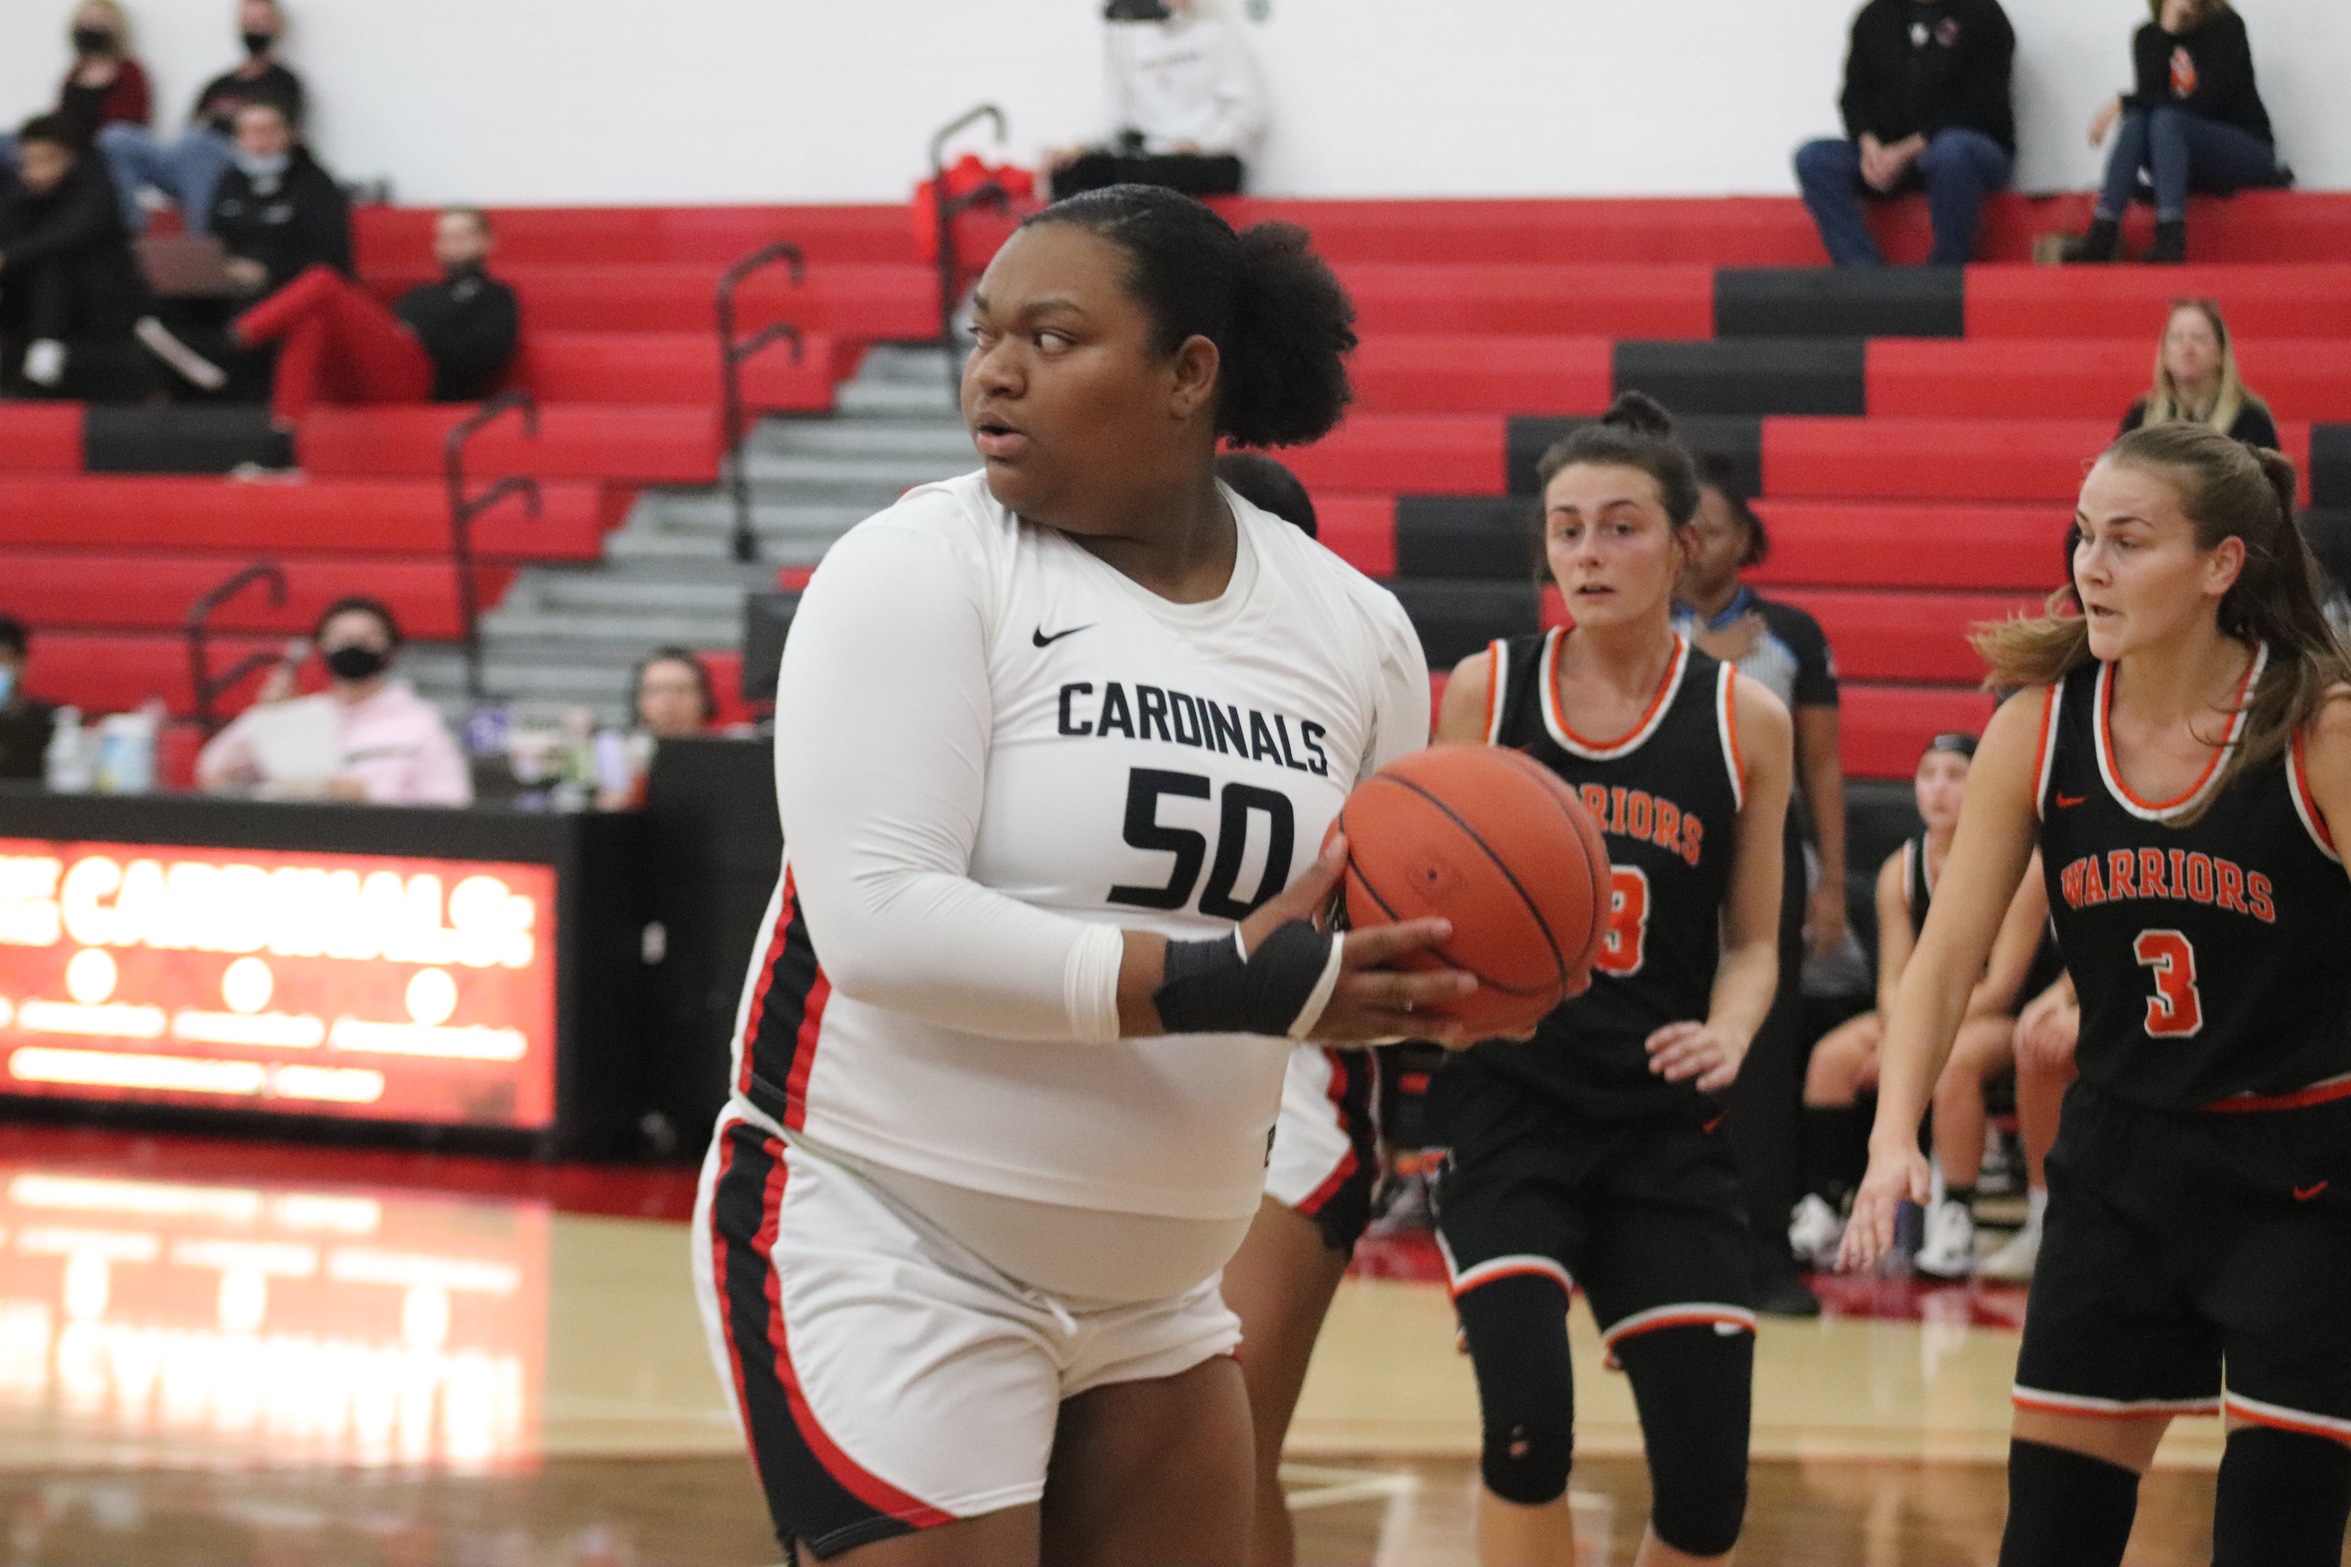 Women's Basketball survives late rally to down (RV) Rochester 86-79